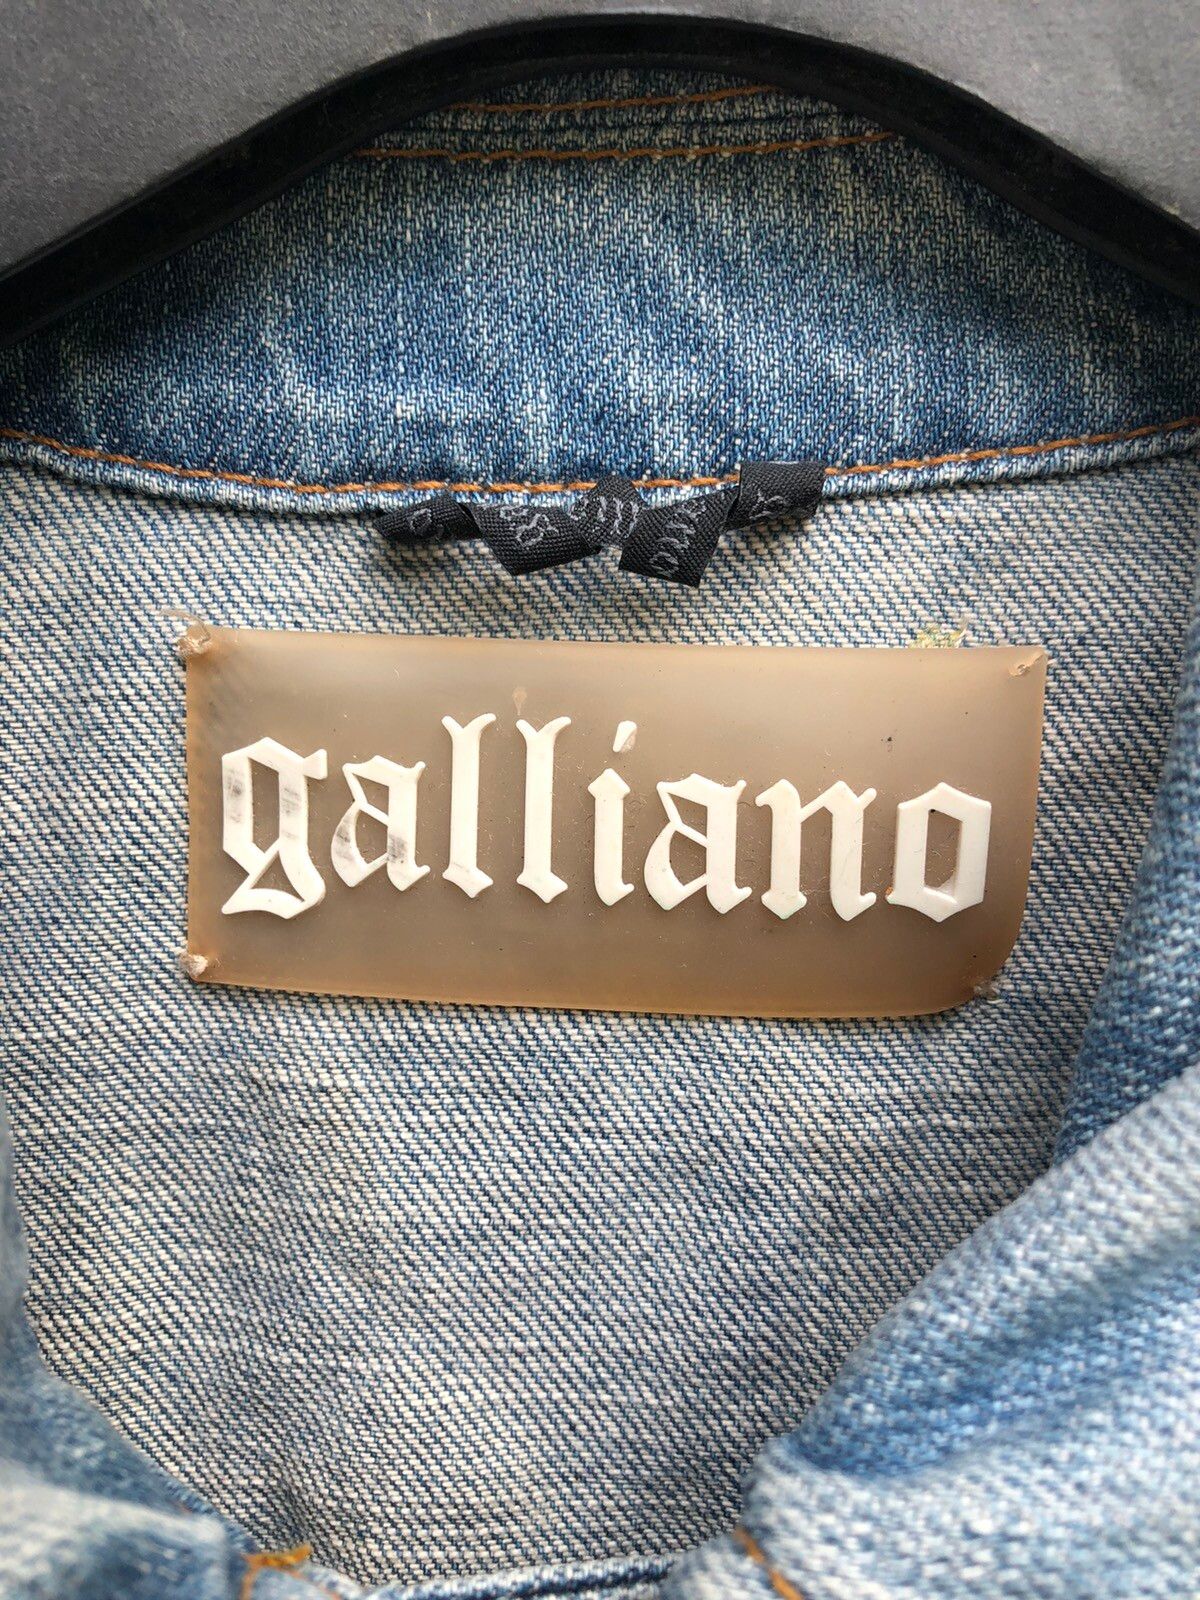 Archival Clothing Archived Galliano Poetic Printed Blue Washed Denim Trucker Size US M / EU 48-50 / 2 - 15 Thumbnail